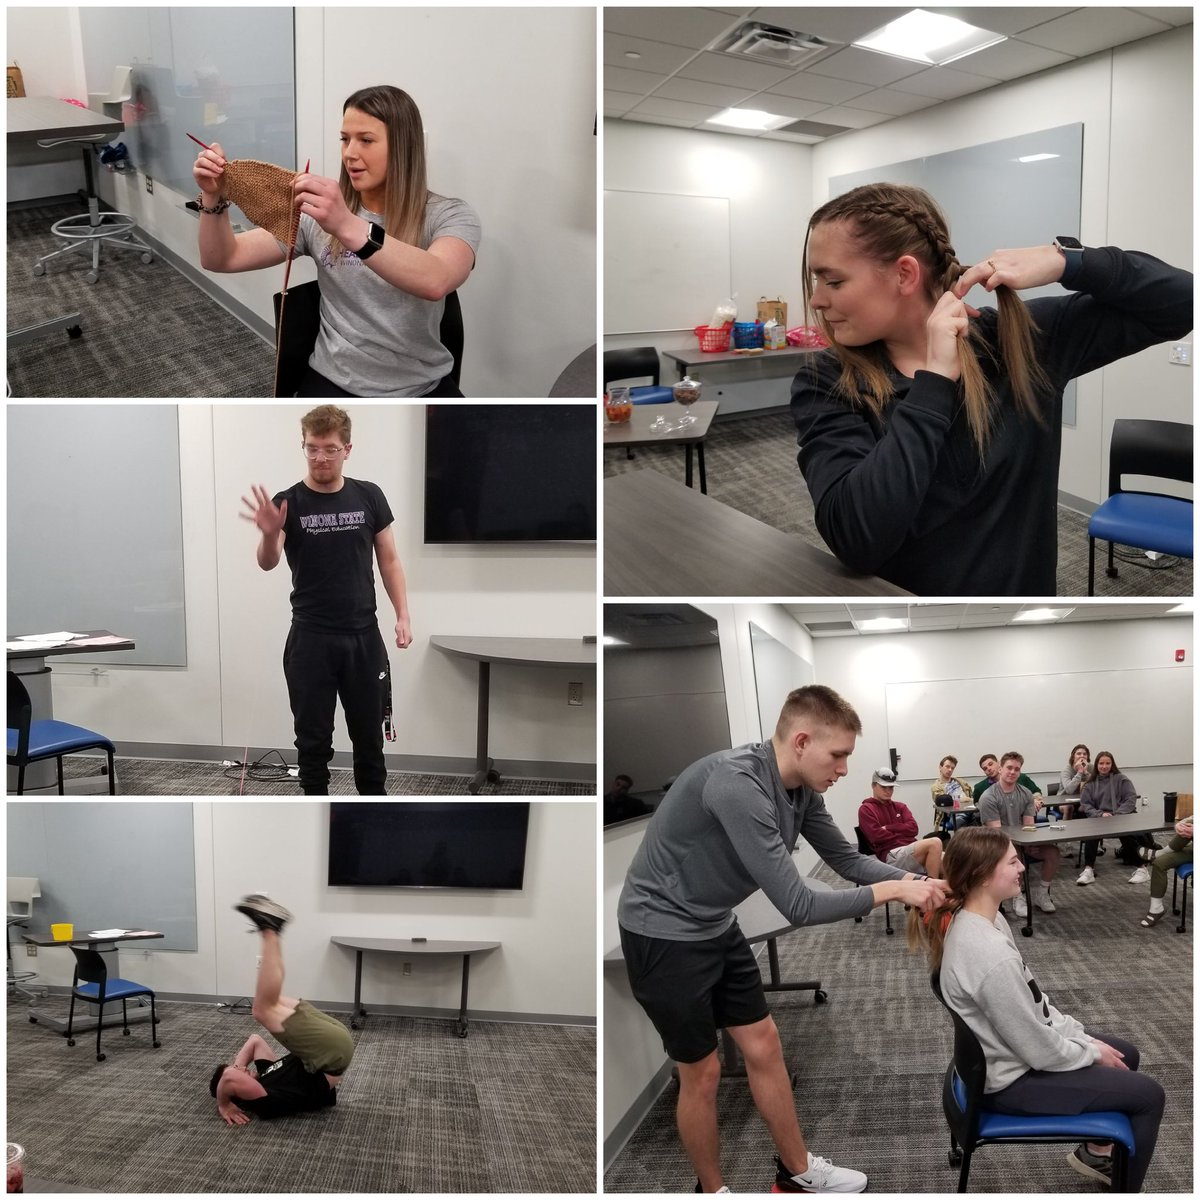 @SHAPE_America Watching my students show and tell the novel skill they learned as part of our motor behavior class! Such a fun project and way to end the semester. @KenzzPe @cole_mundt  @CPerschnick @ArianaWalker03 💜 #WhatMadeYourWeek